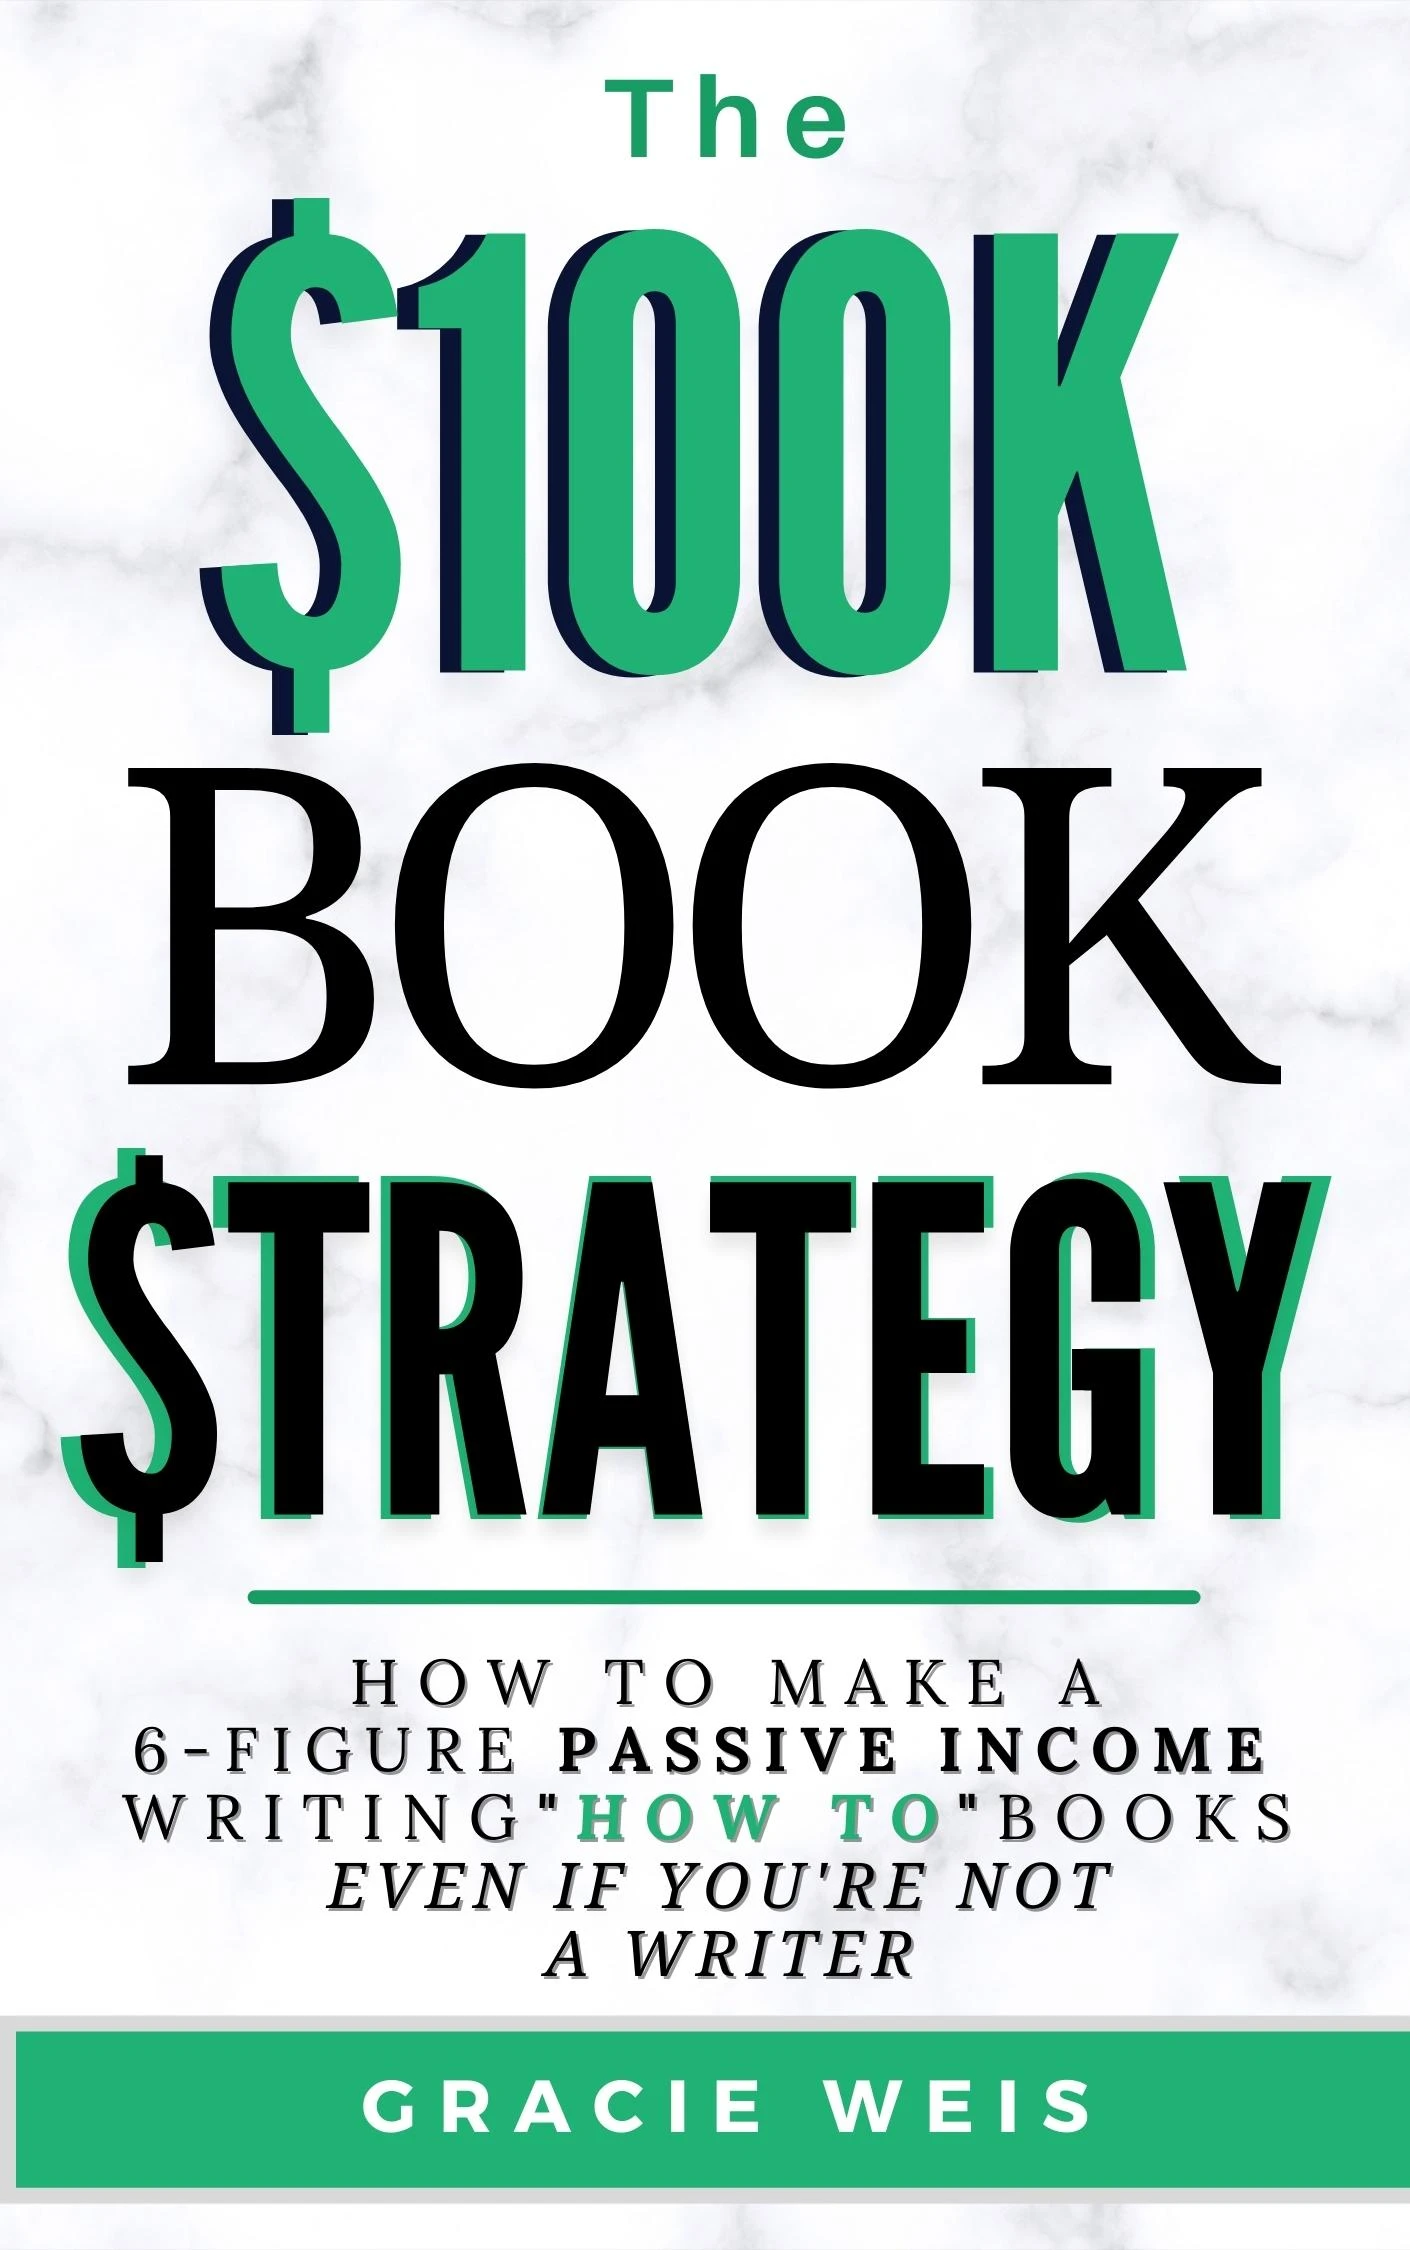 The $100K Book Strategy: How to Make A 6-Figure Passive Income Writing “How To” Books Even If You’re Not a Writer